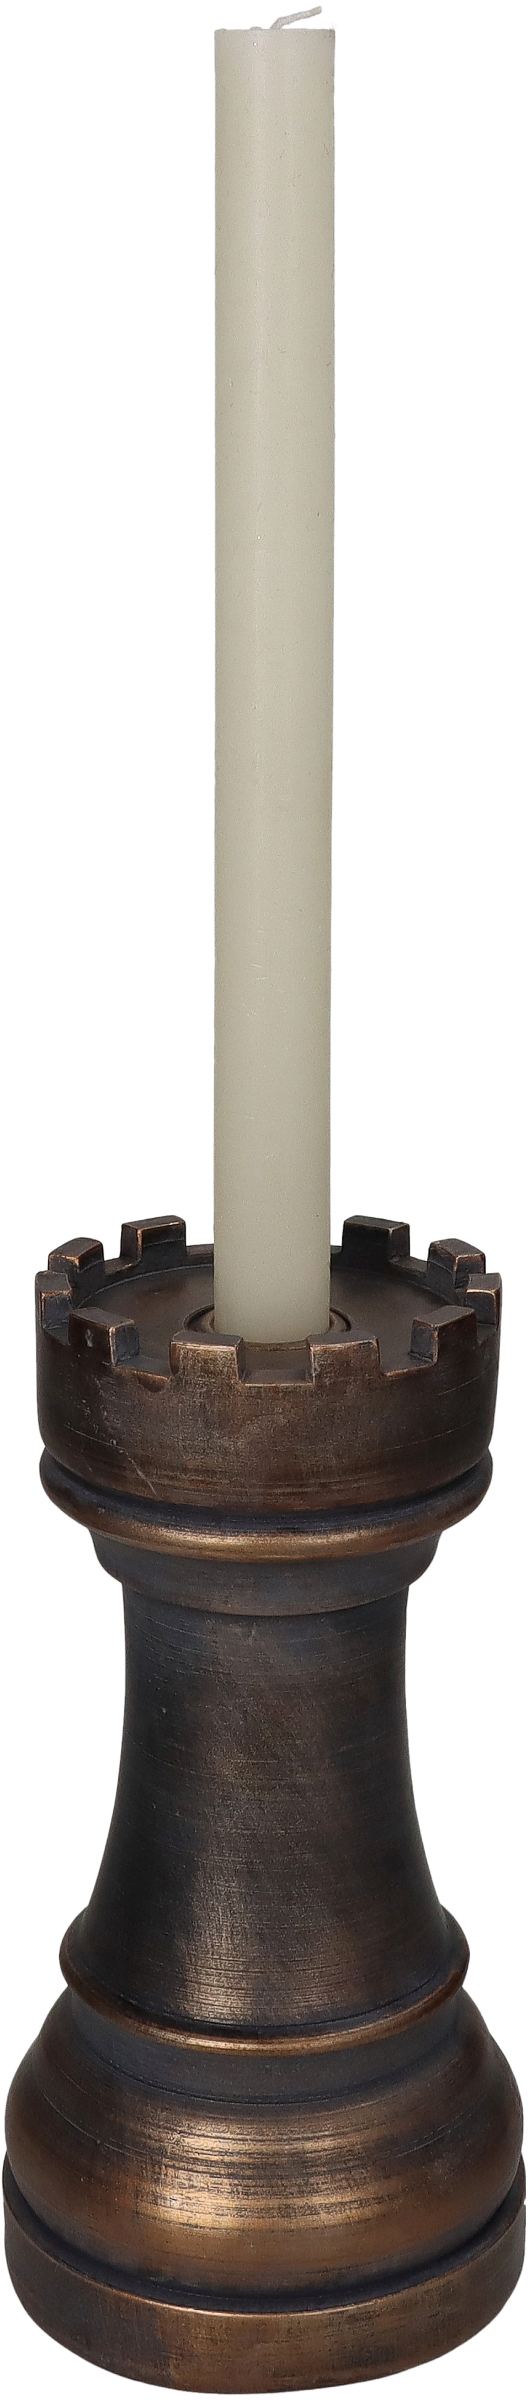 Candle Holder Chess Piece Polyresin Black 11x11x22.5cm